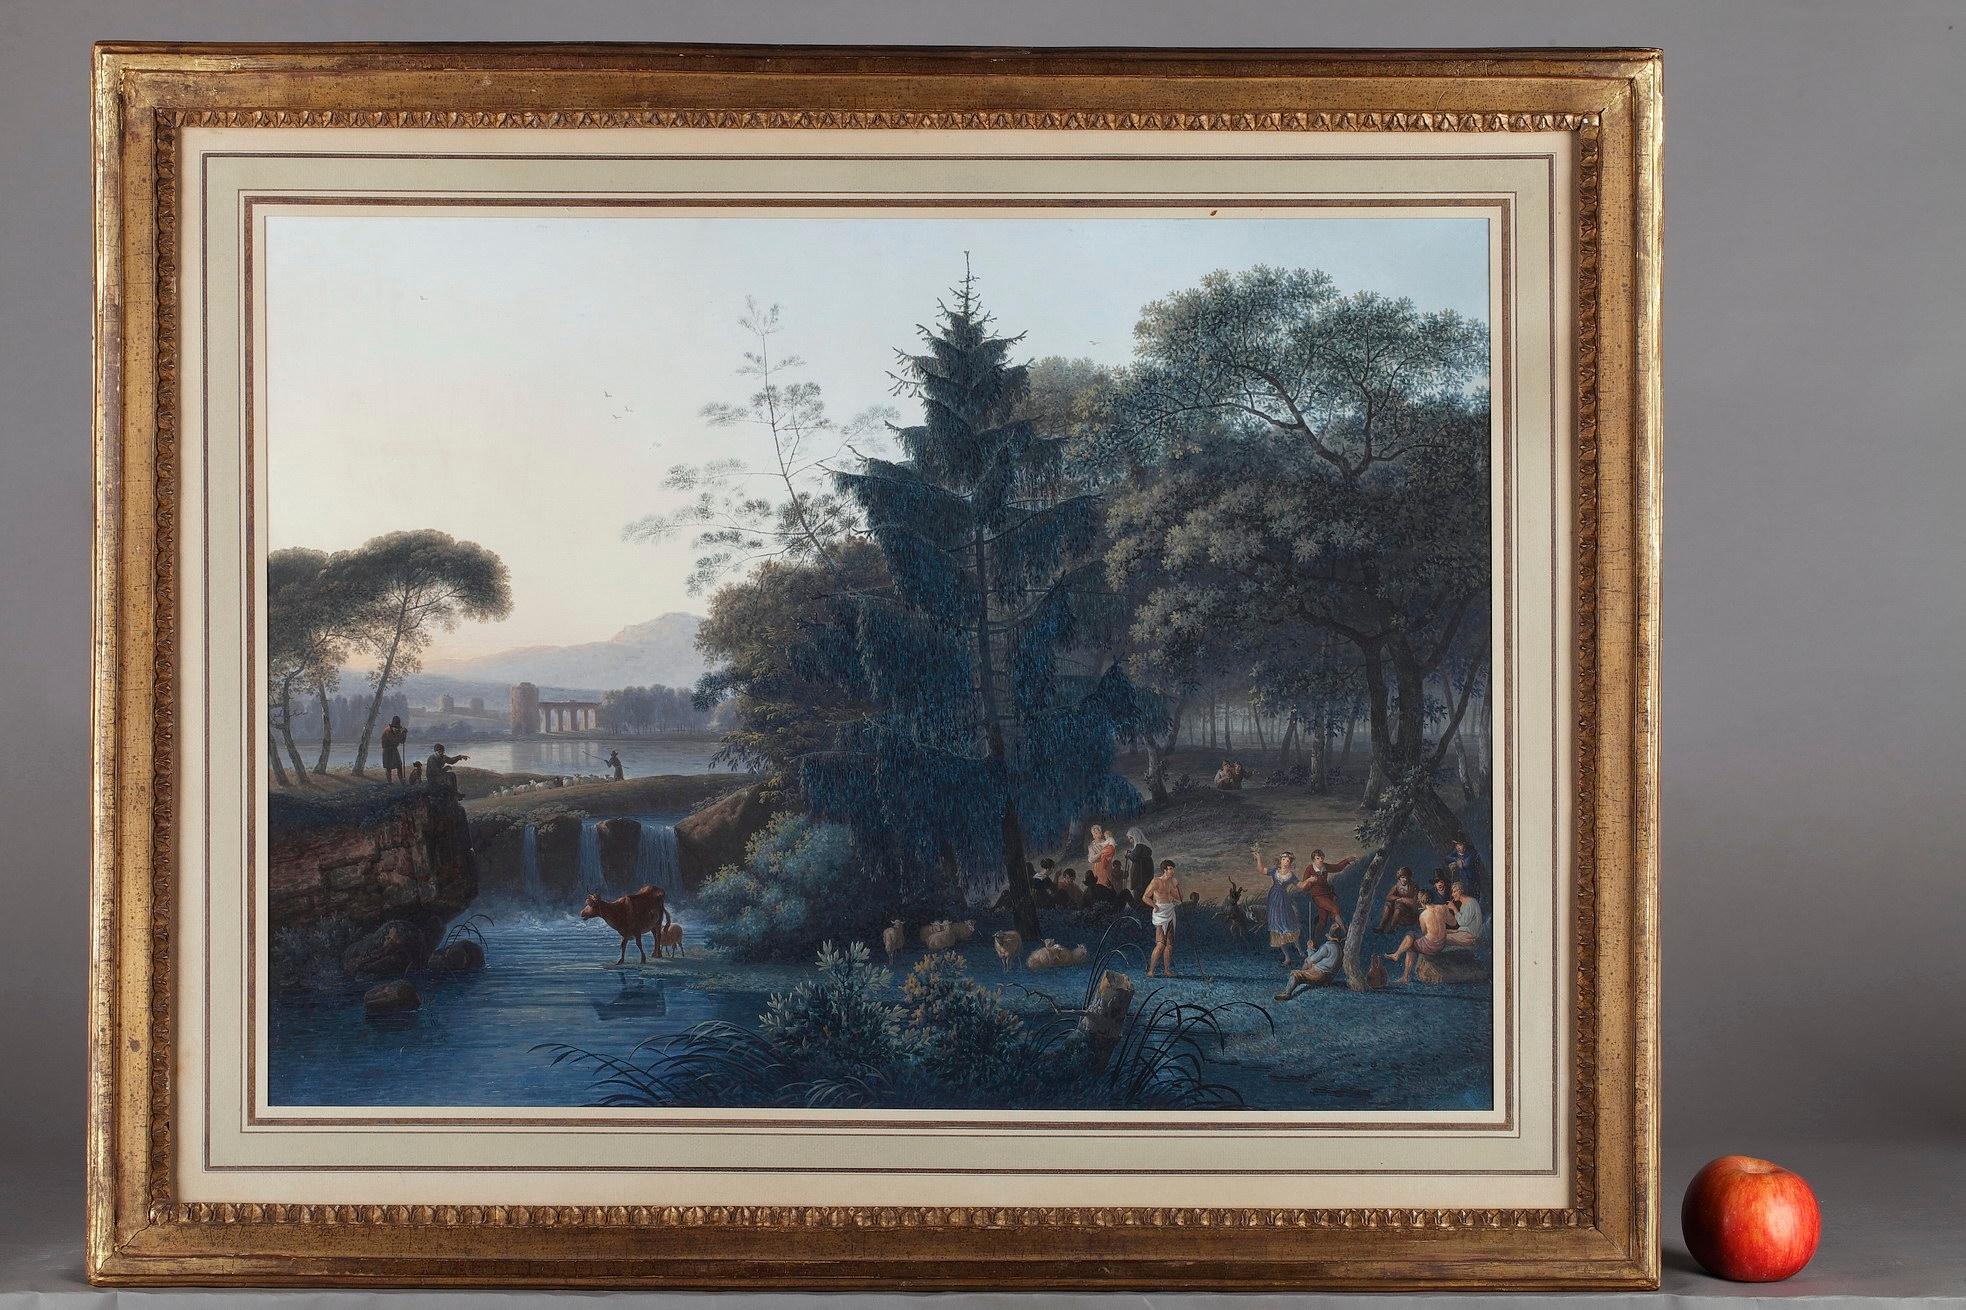 Two Romantic paintings depicting a country landscape with mill, and a pastoral scene with shepherds and peasants dancing or discussing. The pastoral, or bucolic, scenes depict life in an idealized manner, with schepherds herding livestock around